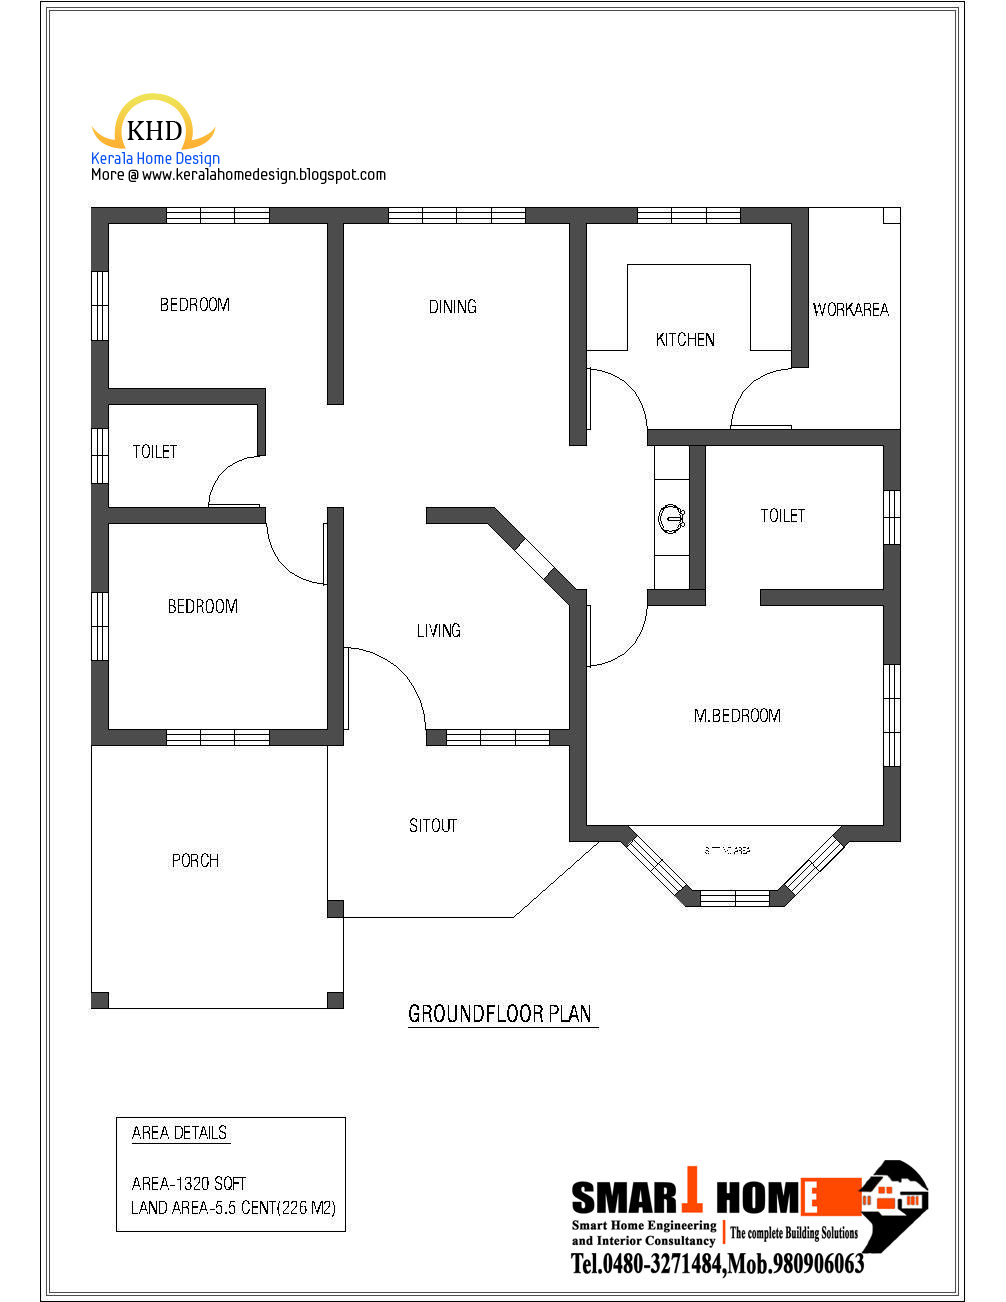 Single Floor House Plan and Elevation - 1320 Sq. Ft.